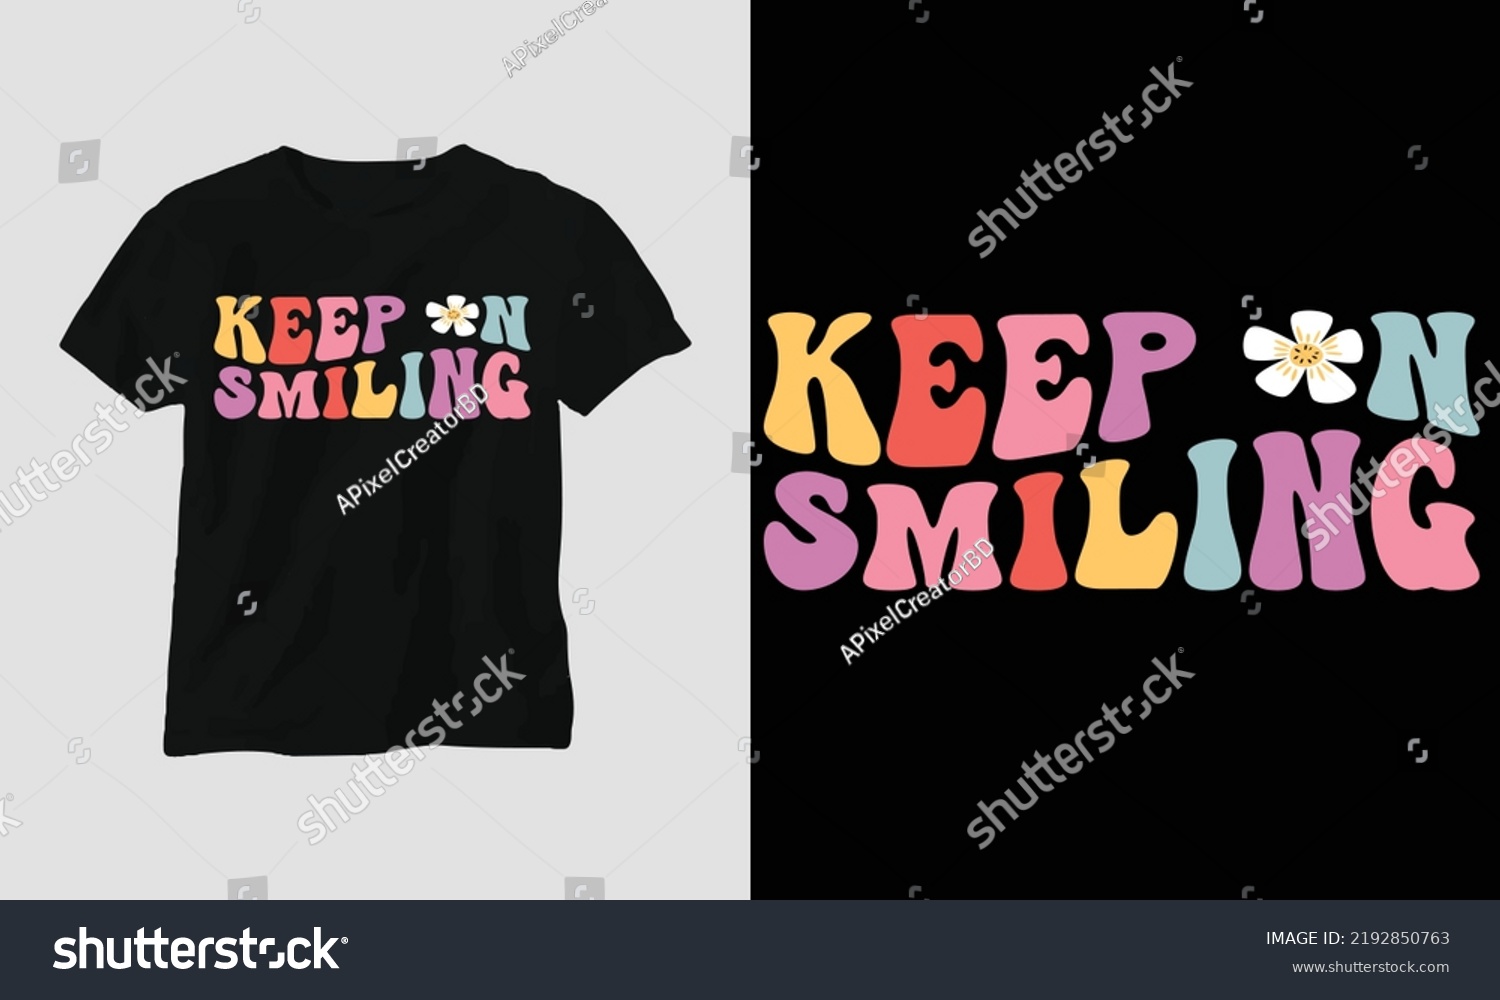 SVG of Wavy Retro Groovy T-shirt Design. Quotes with “Groovy” Design vector Graphic Design T-Shirt, mag, sticker, wall mat, etc. Design vector Graphic Template svg